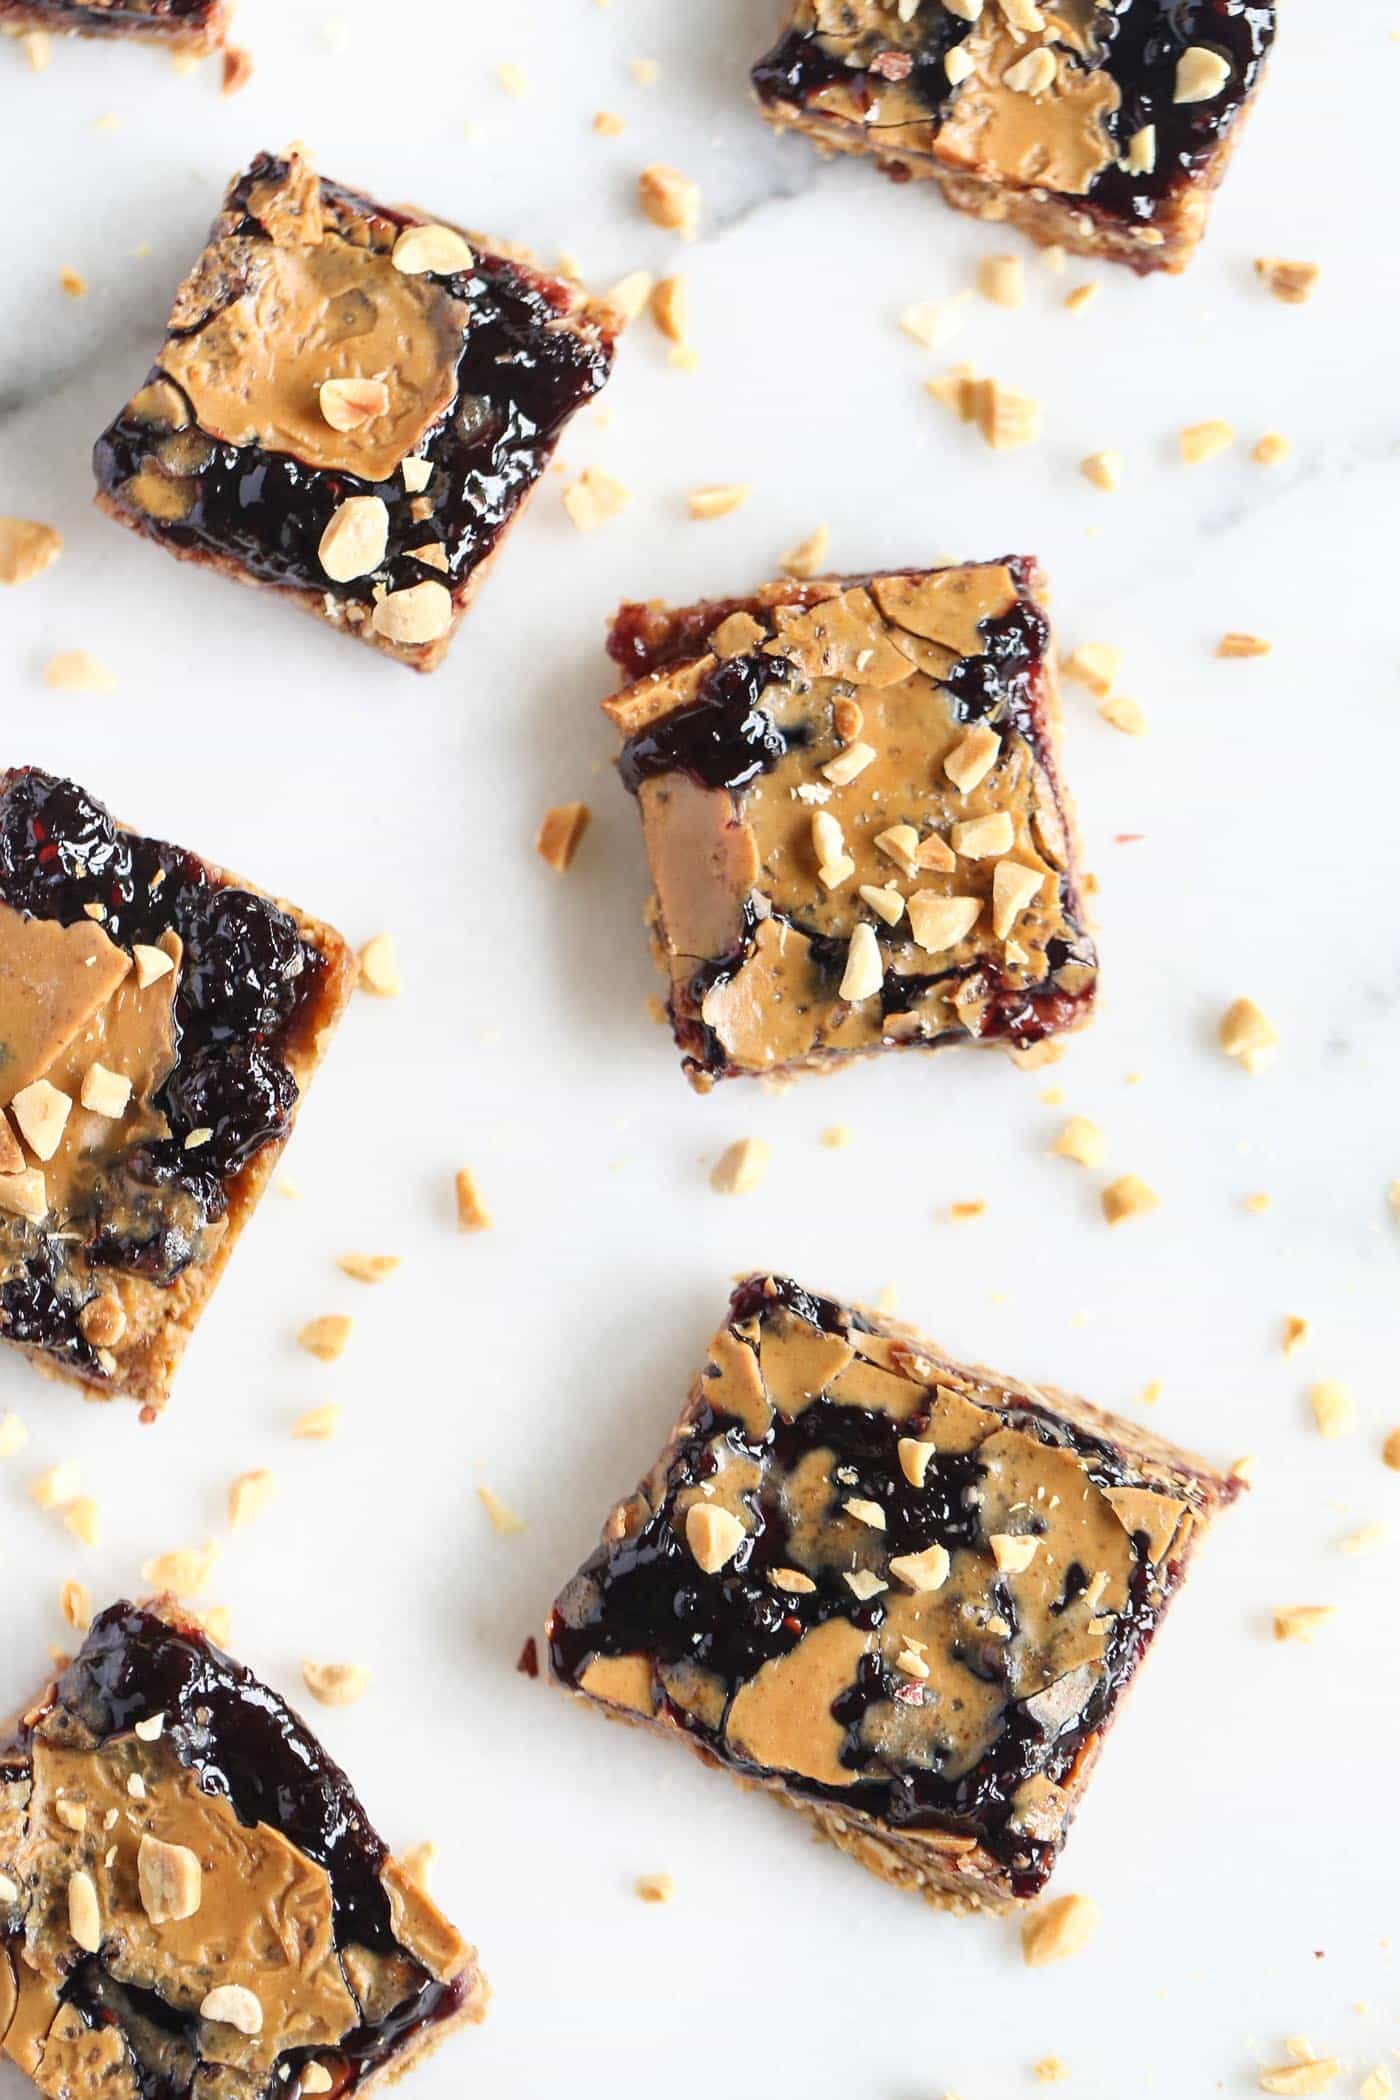 Need an afternoon pick-me-up? These PB&J Snack Bars are AMAZING! packed with nutrition, only 8 ingredients and so simple to make!